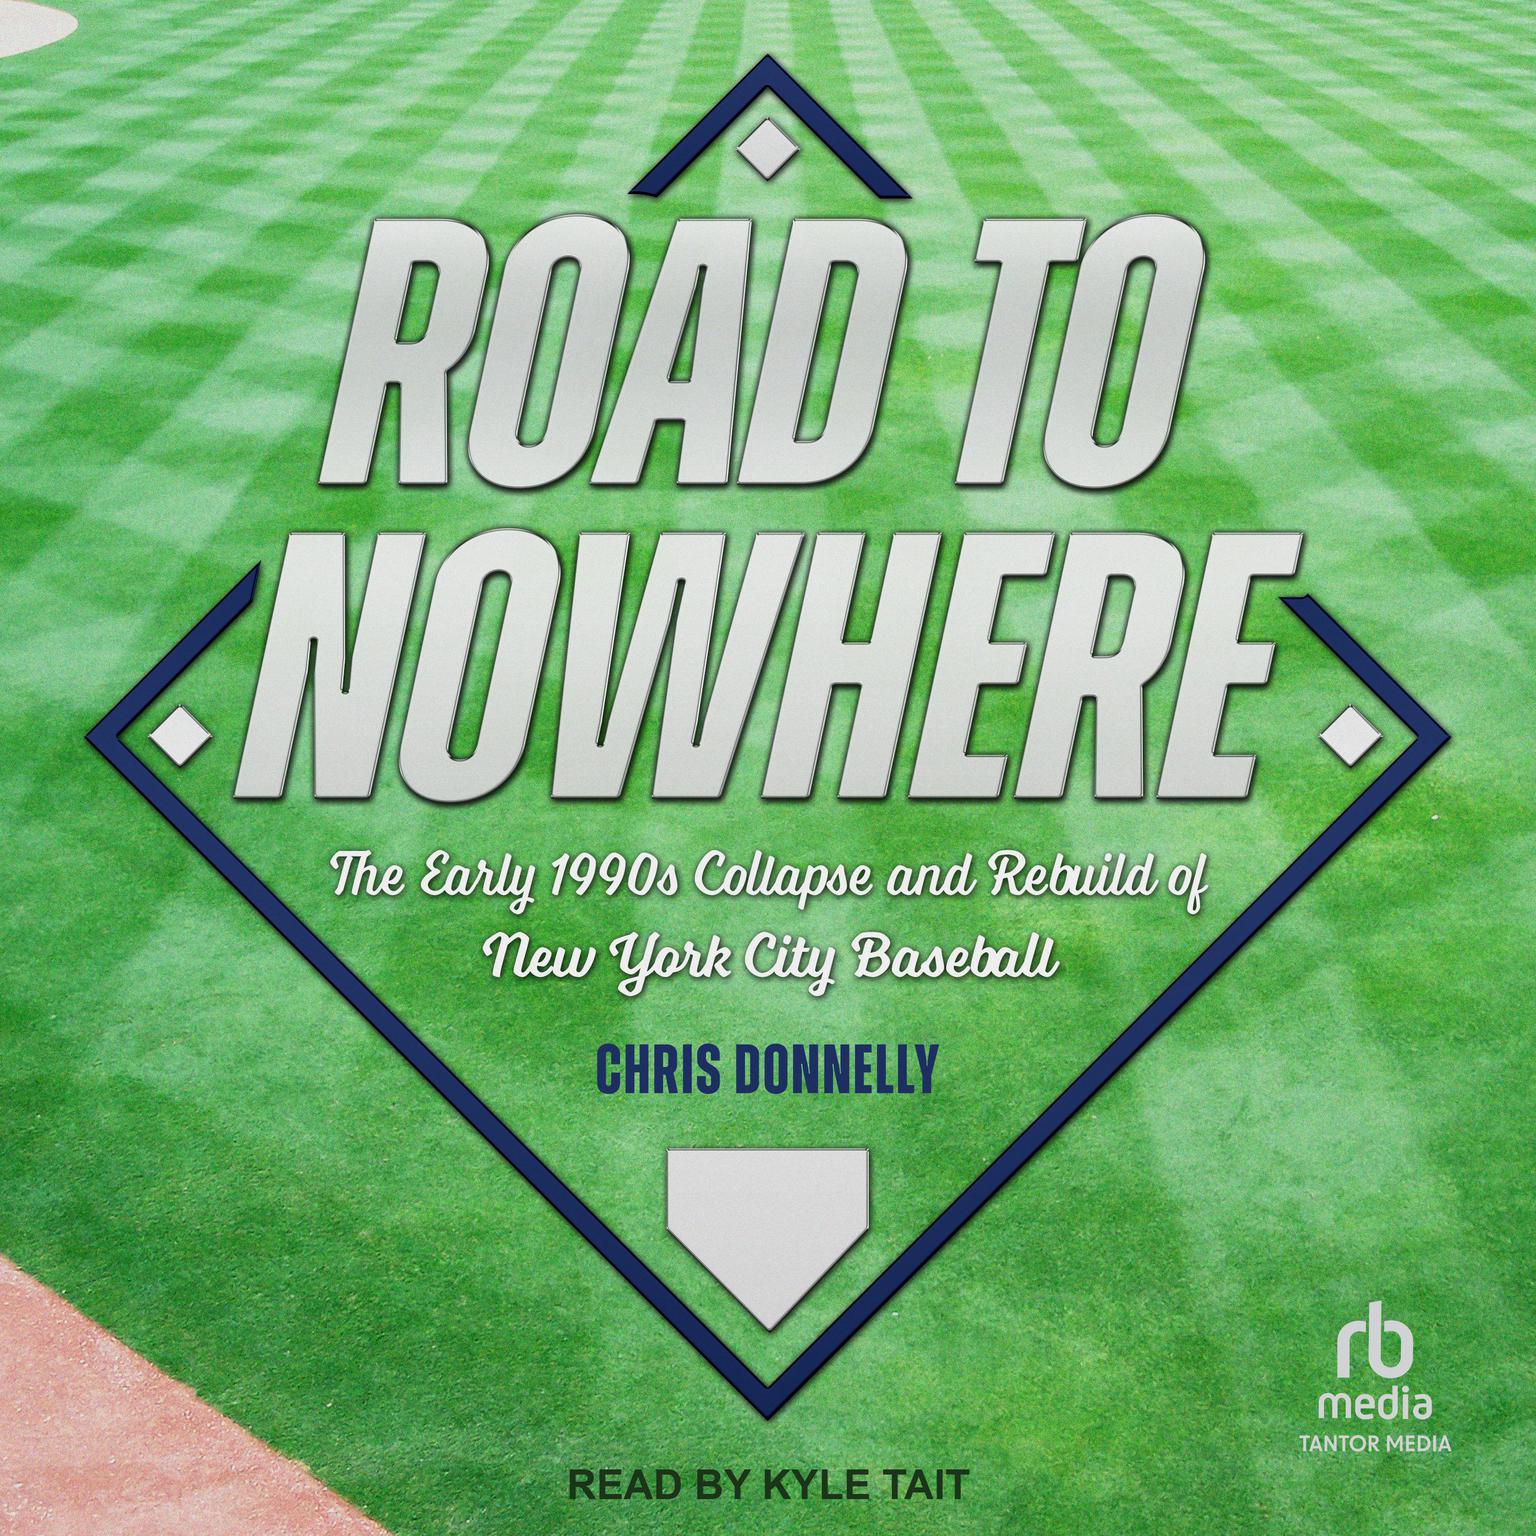 Road to Nowhere: The Early 1990s Collapse and Rebuild of New York City Baseball Audiobook, by Chris Donnelly